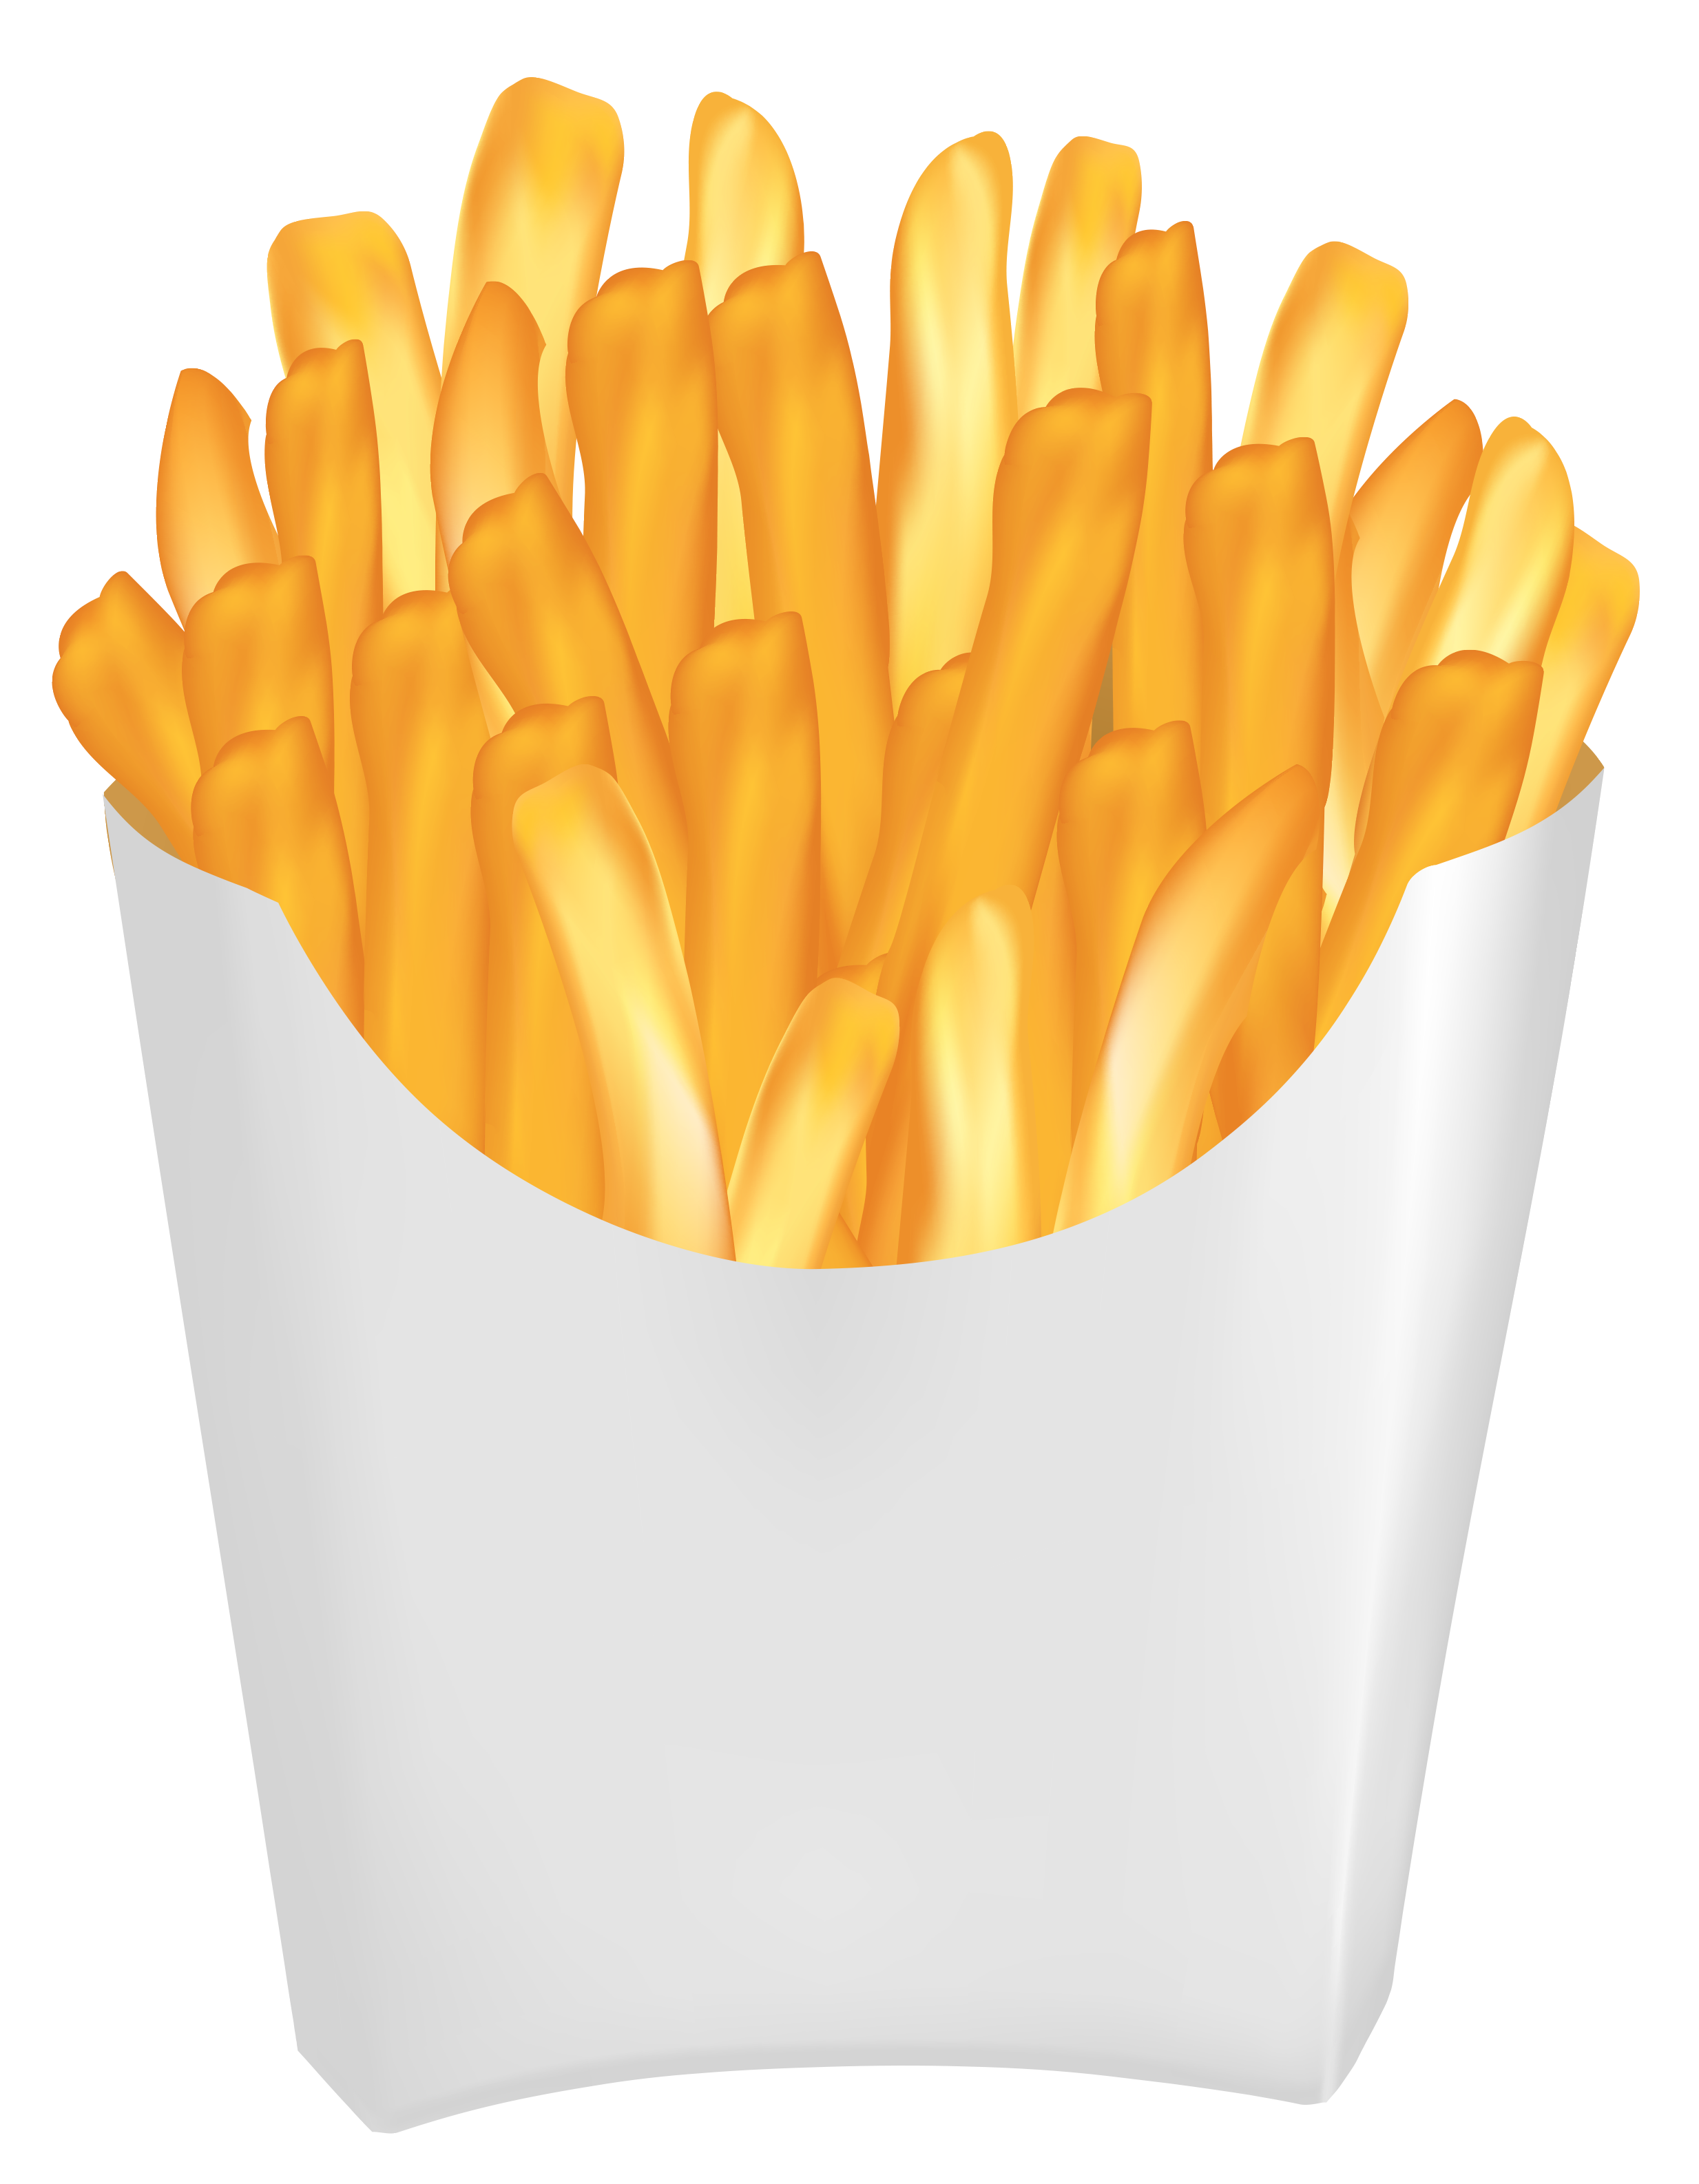 Fries PNG Image